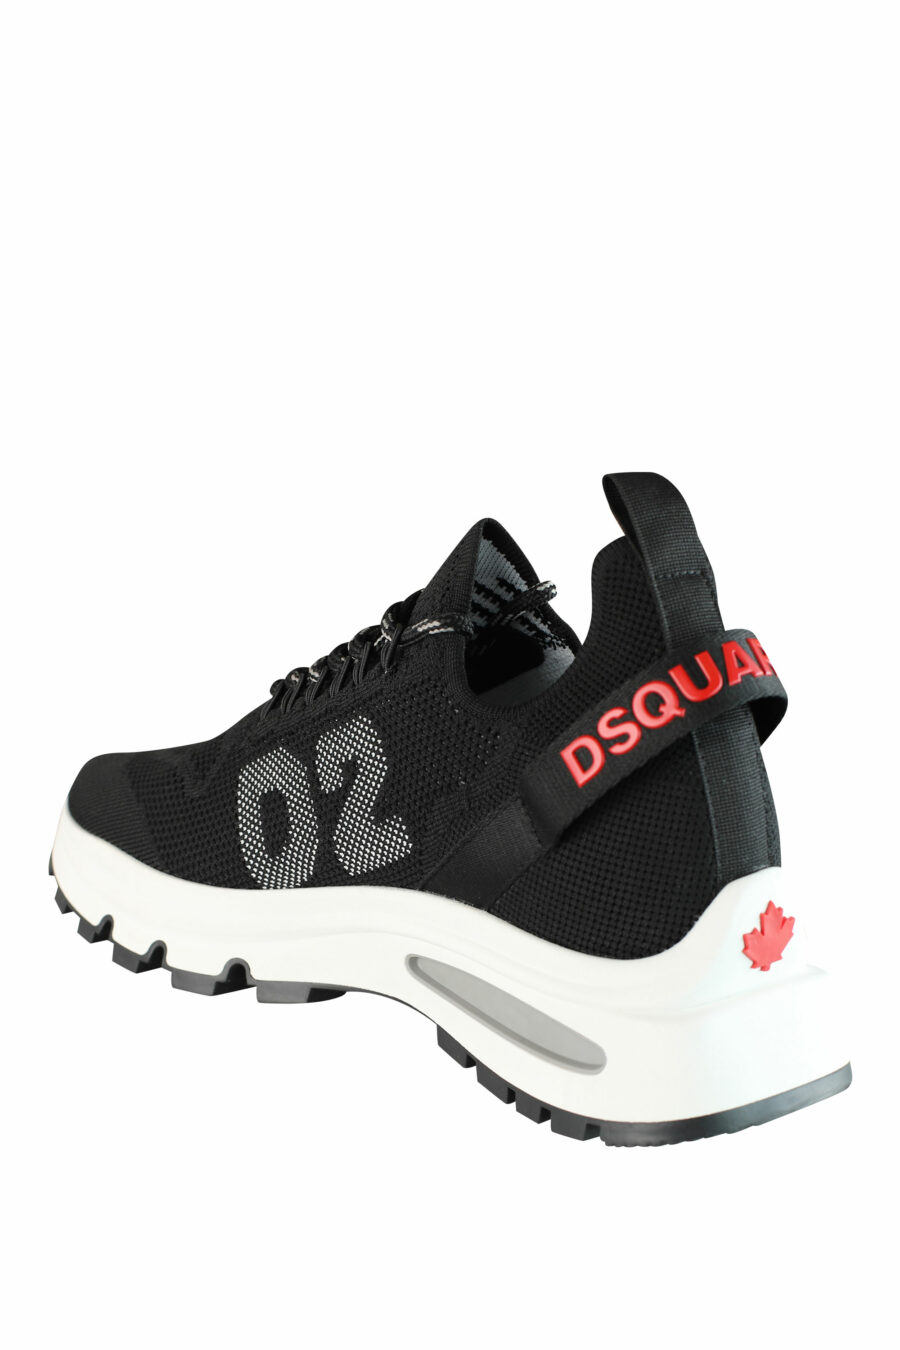 Black "Run D2" trainers with red logo - IMG 1418